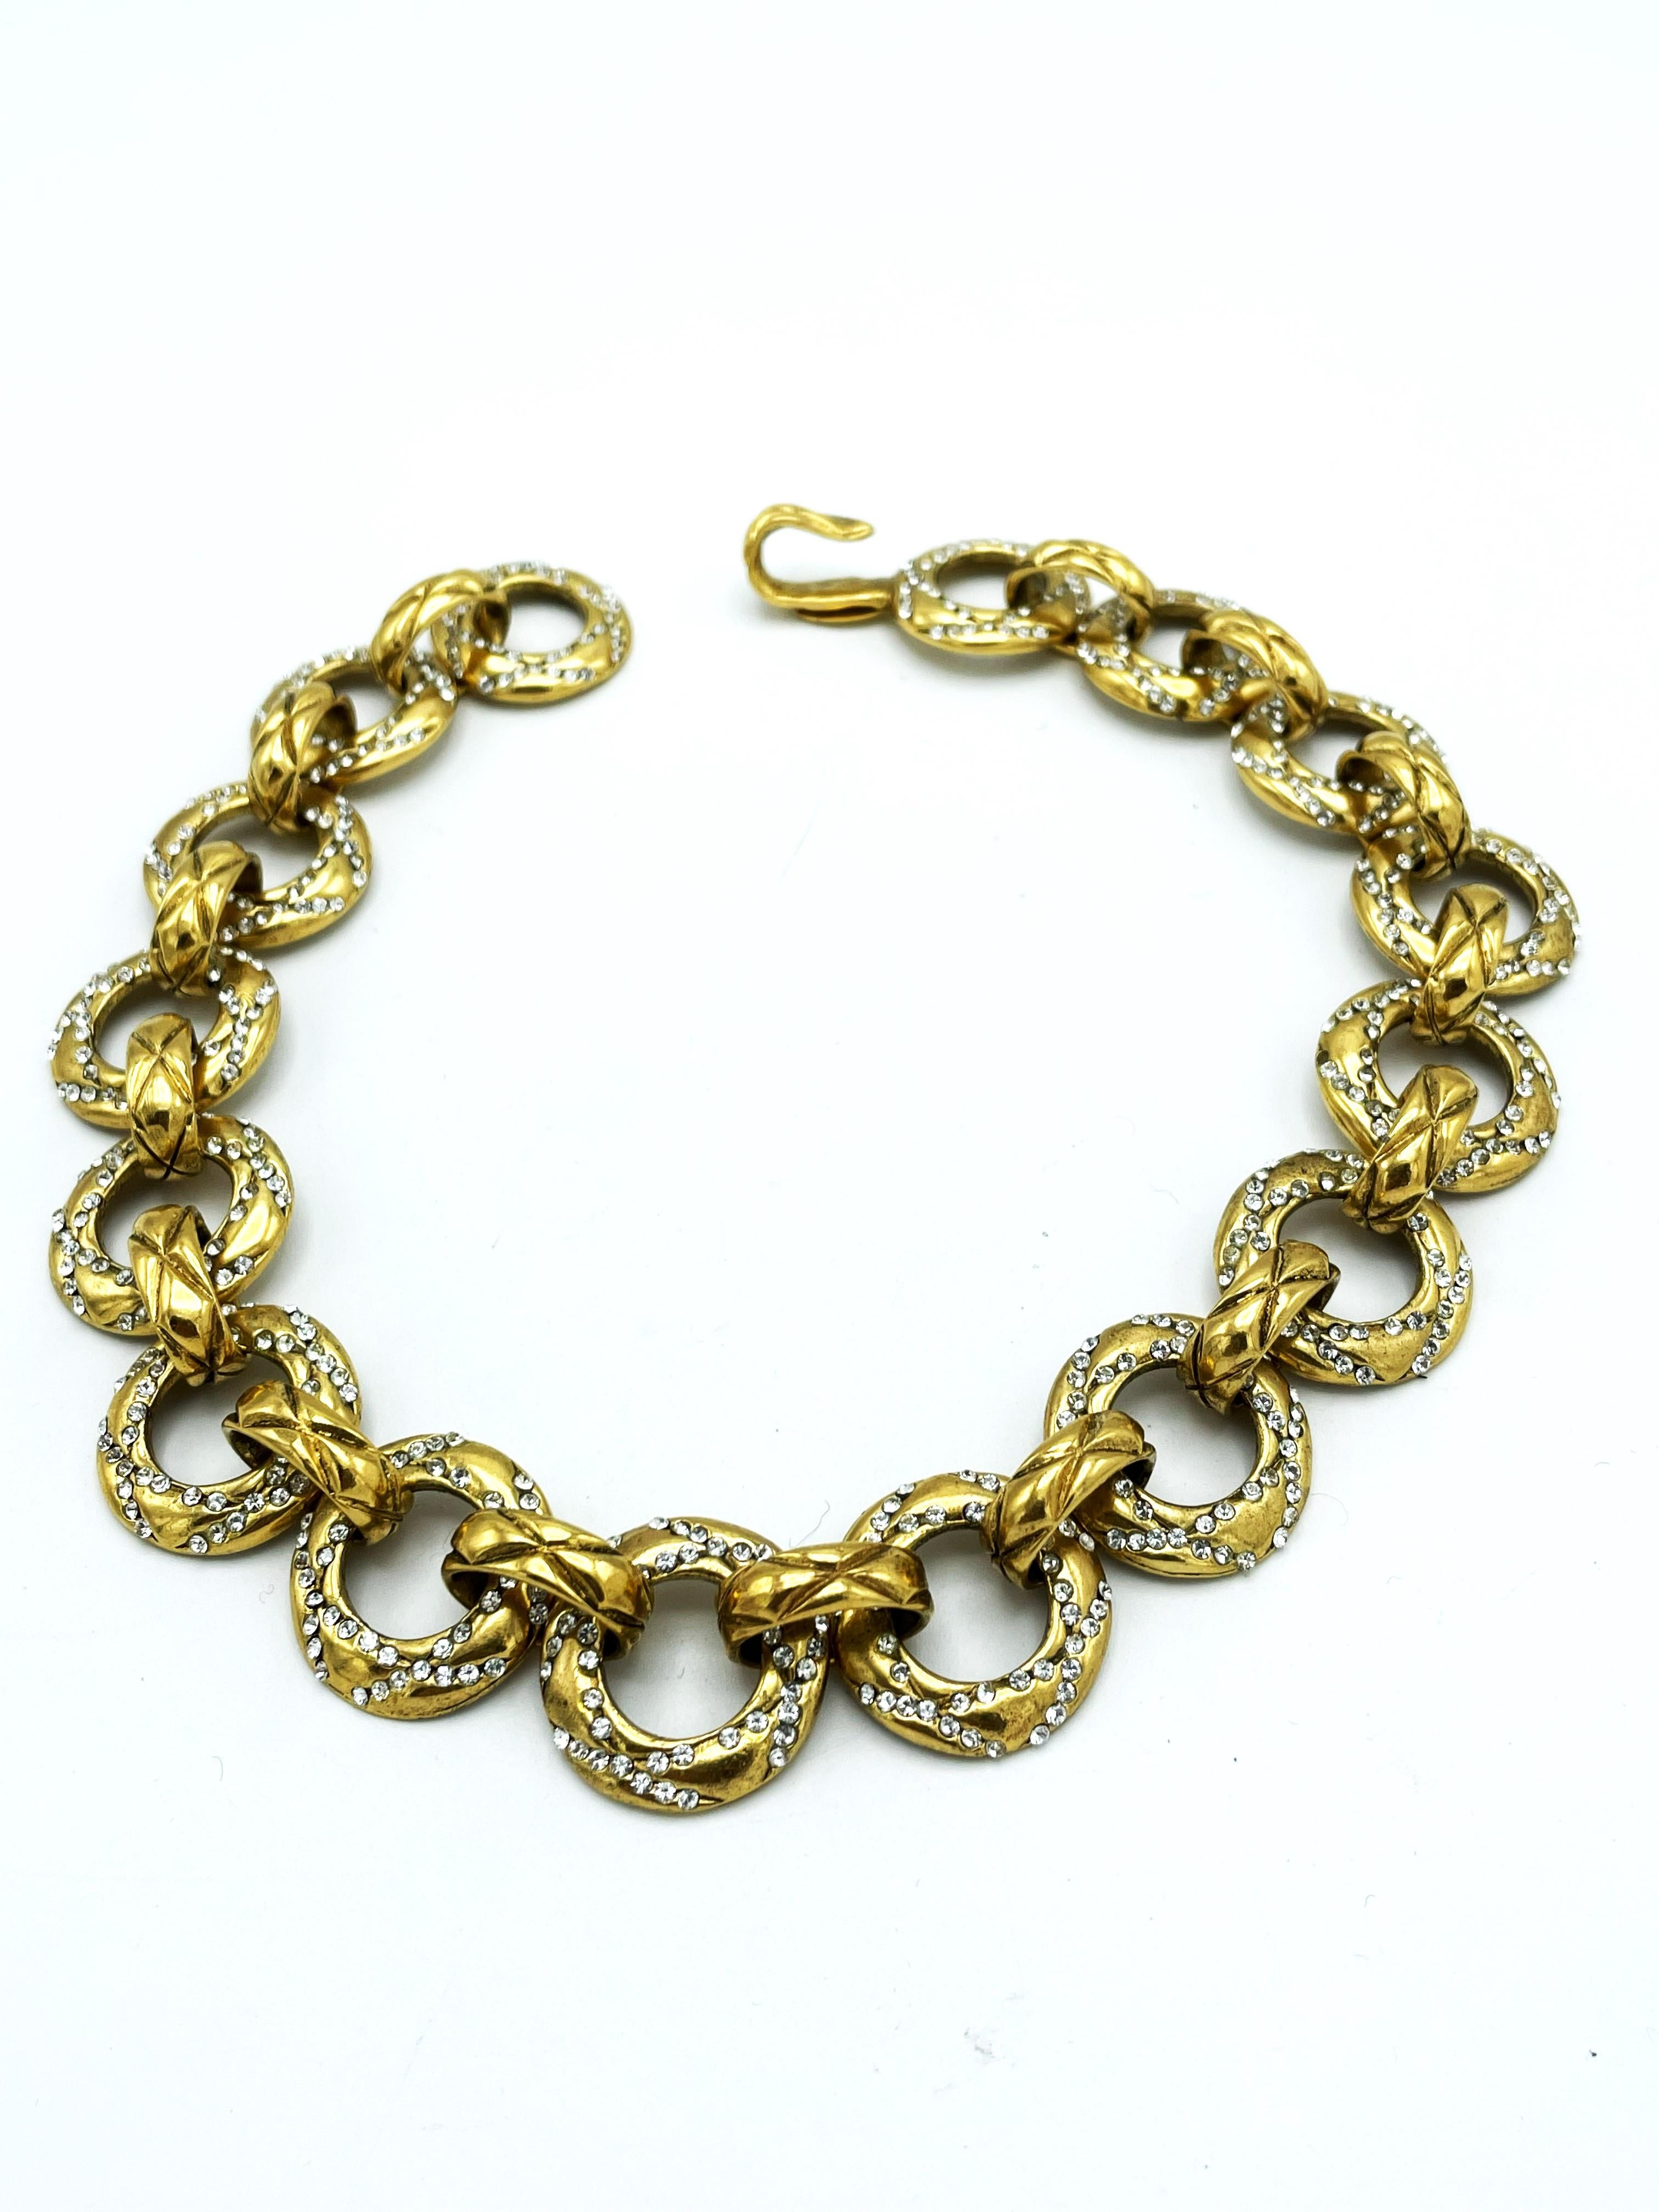 Women's CHANEL NECKLACE BY K. LAGERFELD & V. de CASTELLANE, Crystals, gold plated 1991  For Sale